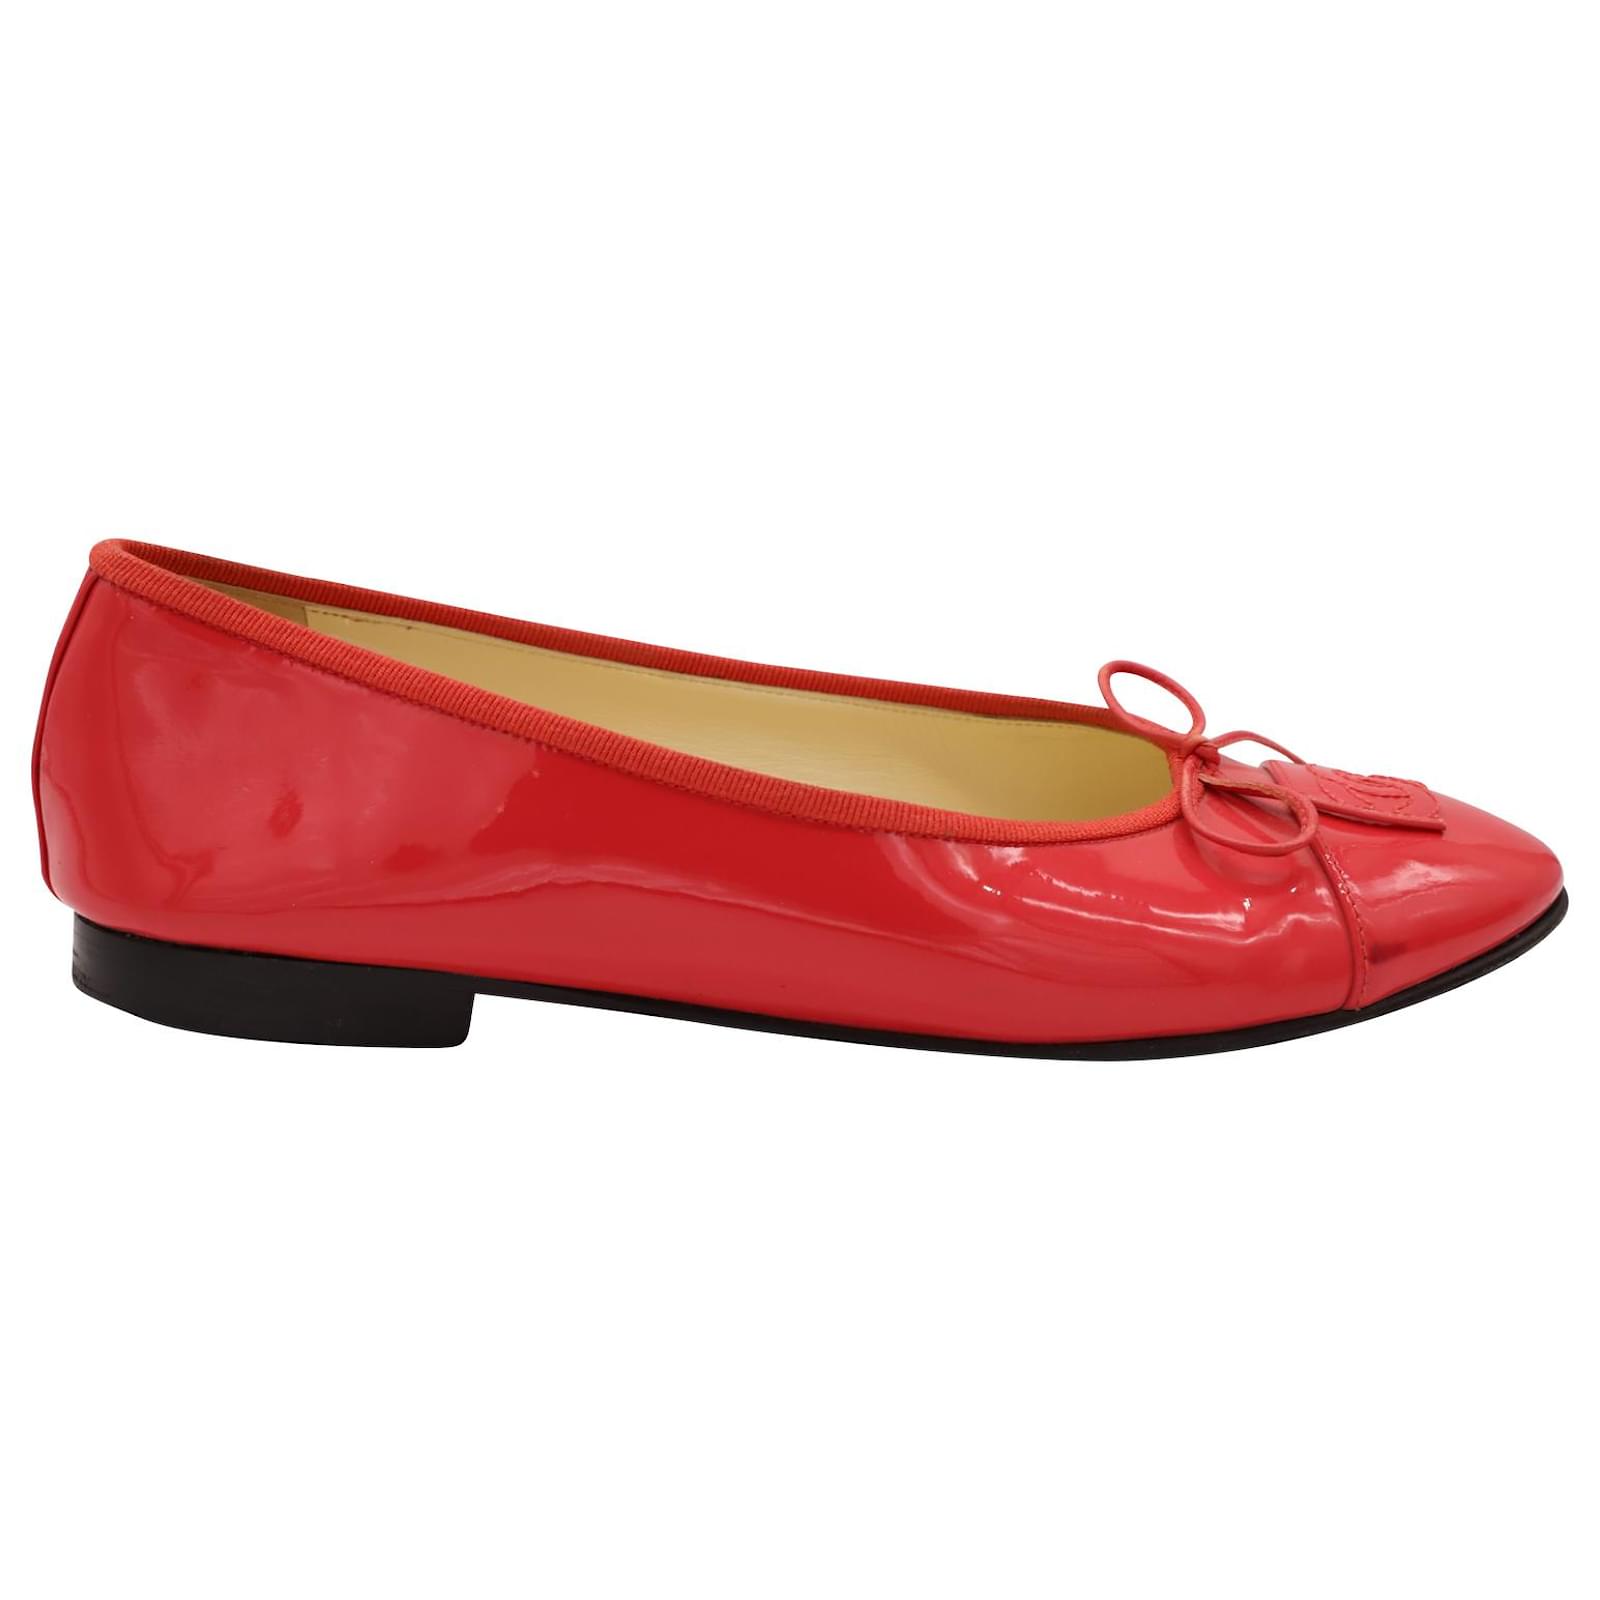 Chanel CC Cap Toe Ballet Flats in Light Red Patent Leather